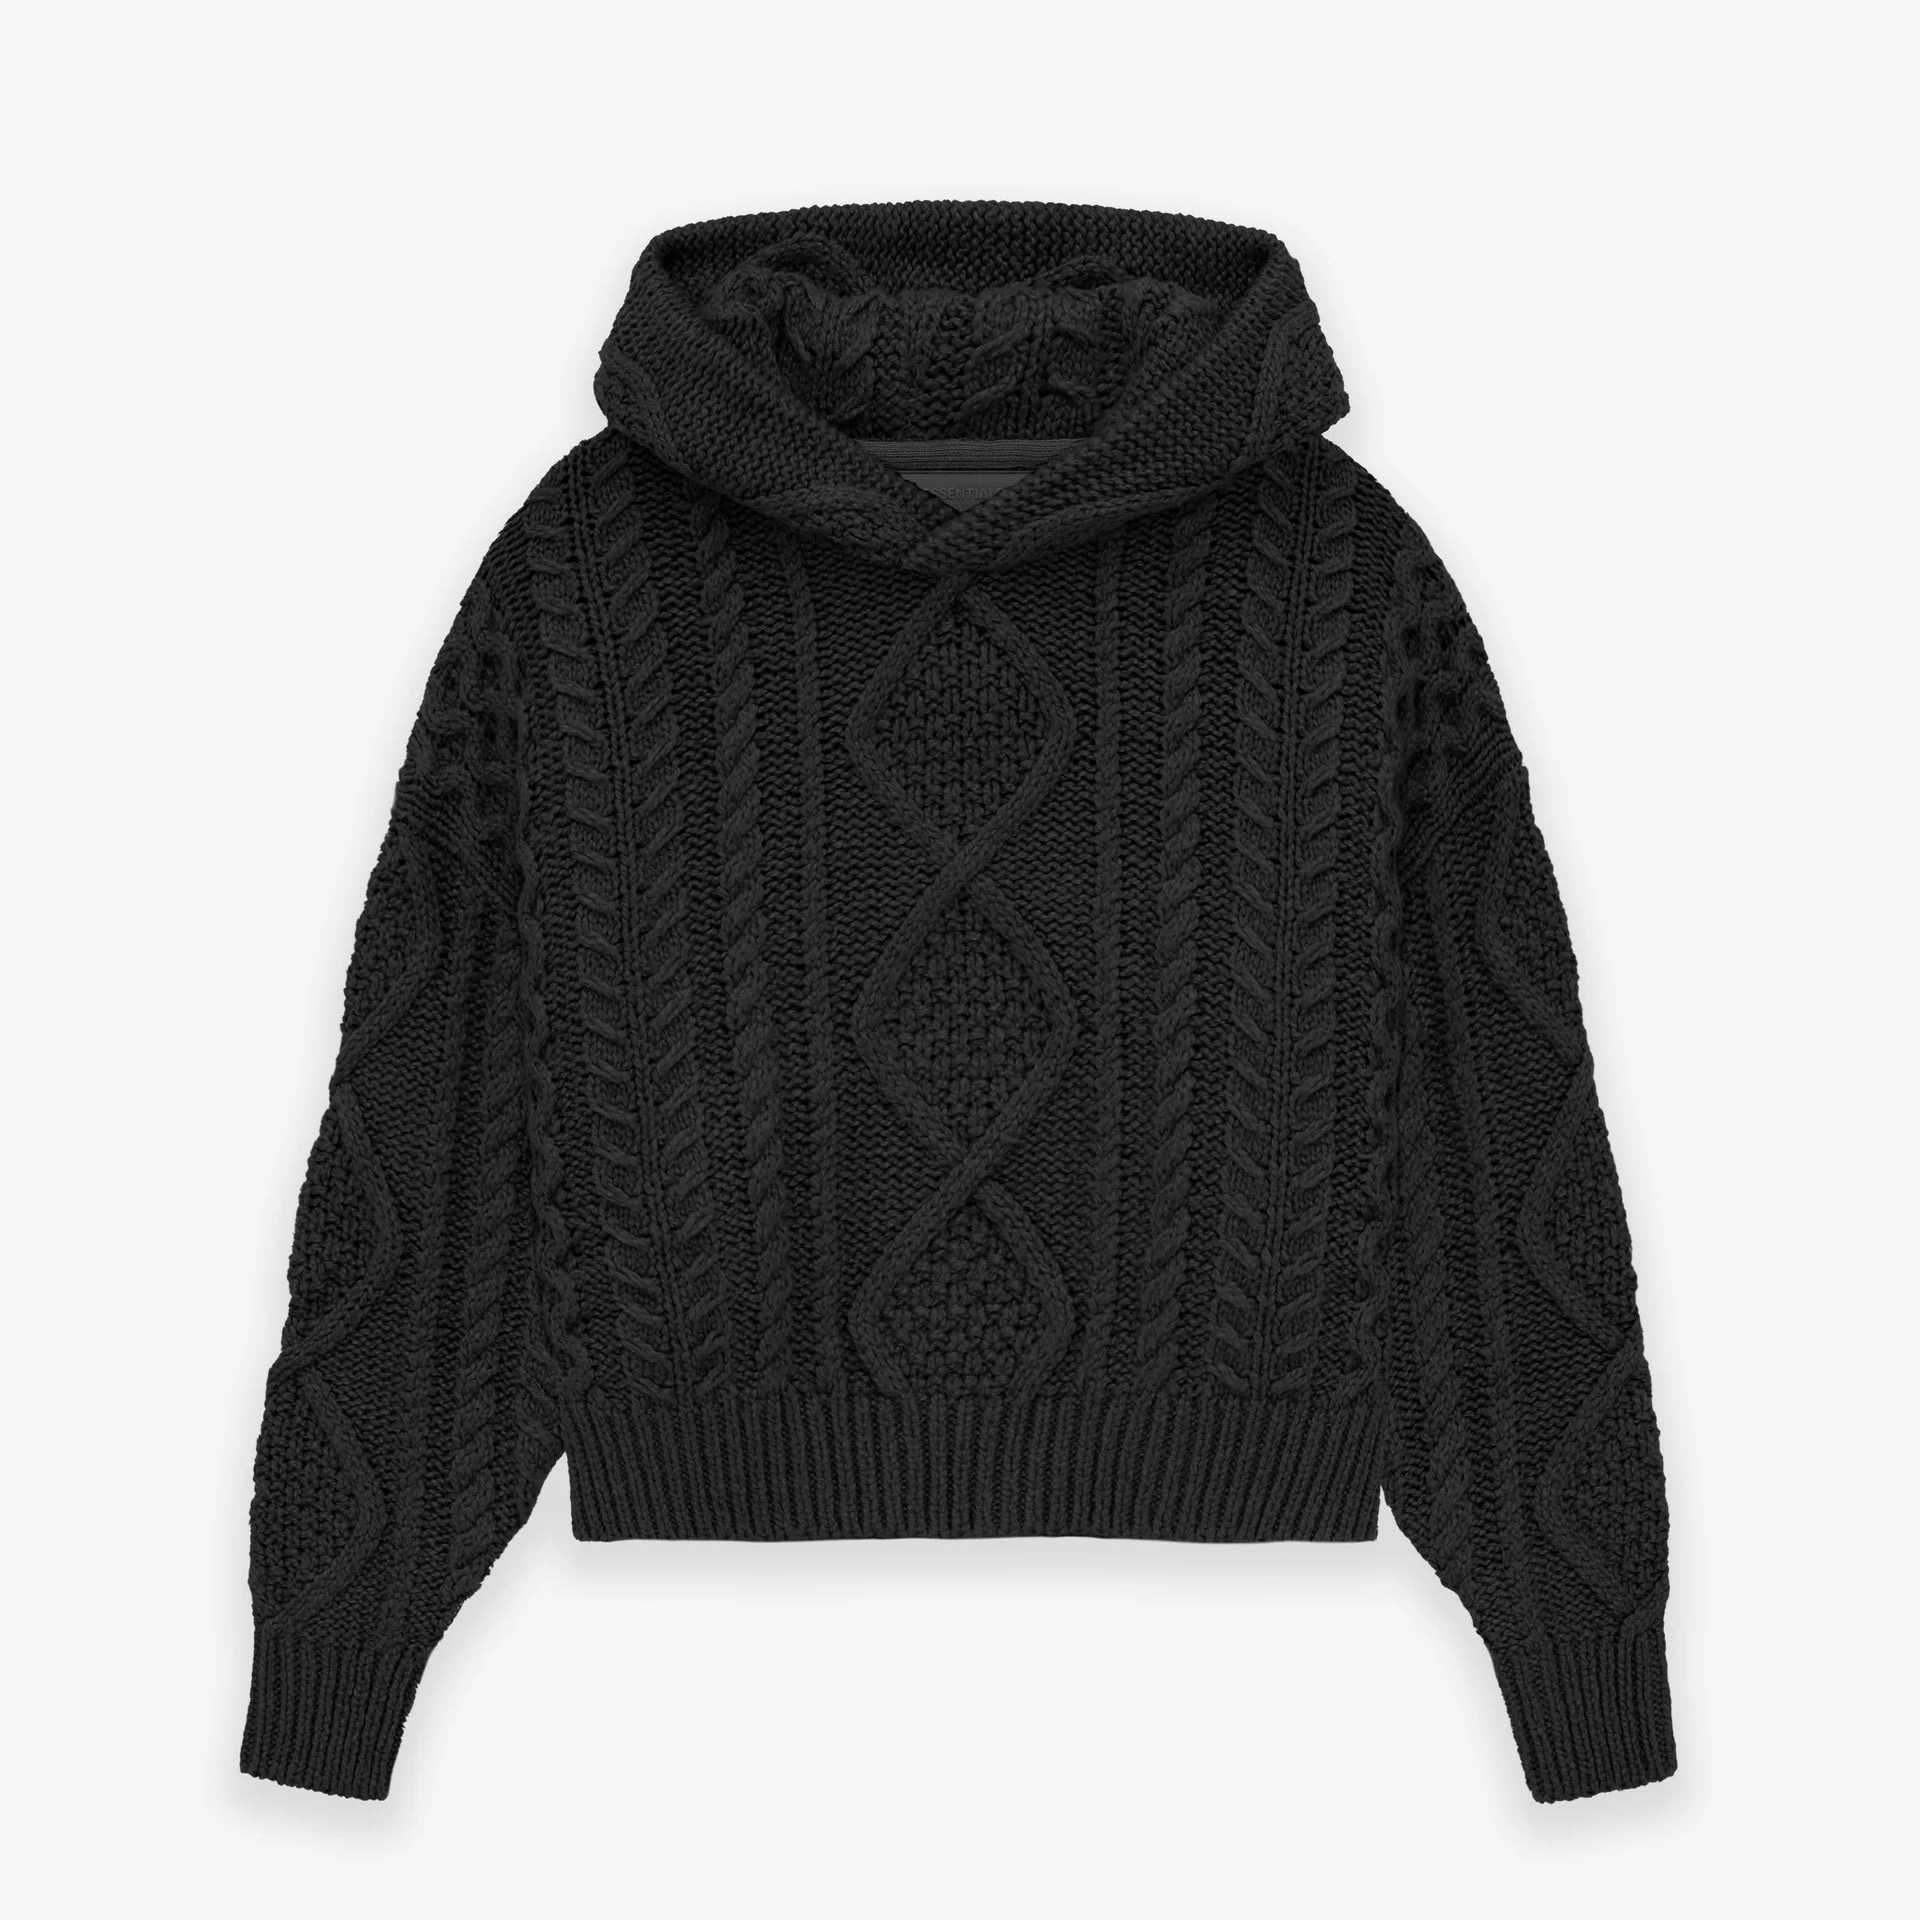 Fear Of God Essentials Cable Knit Hoodie - DesignerGu